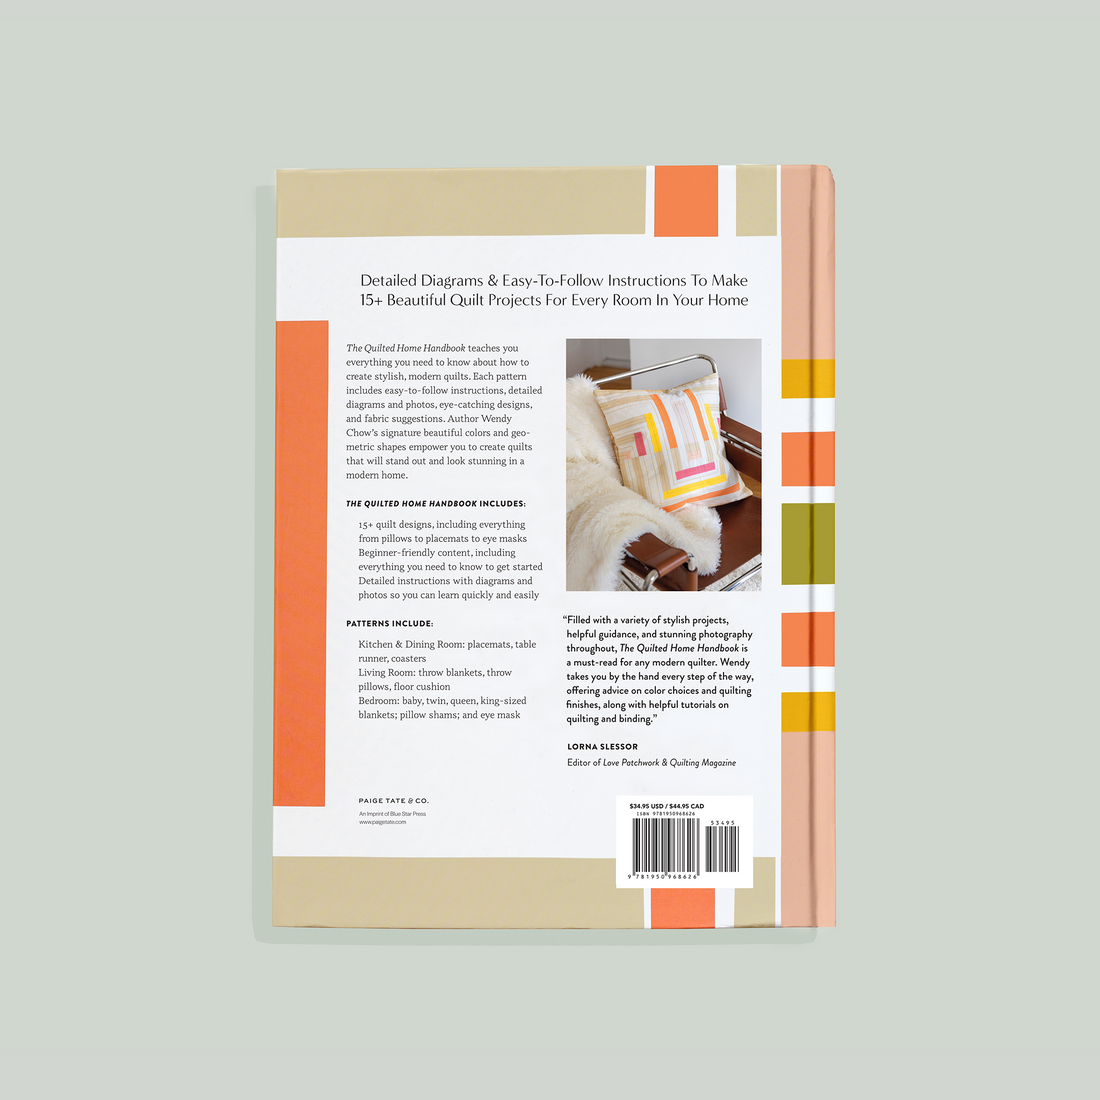 Quilted Home Handbook by Wendy Chow